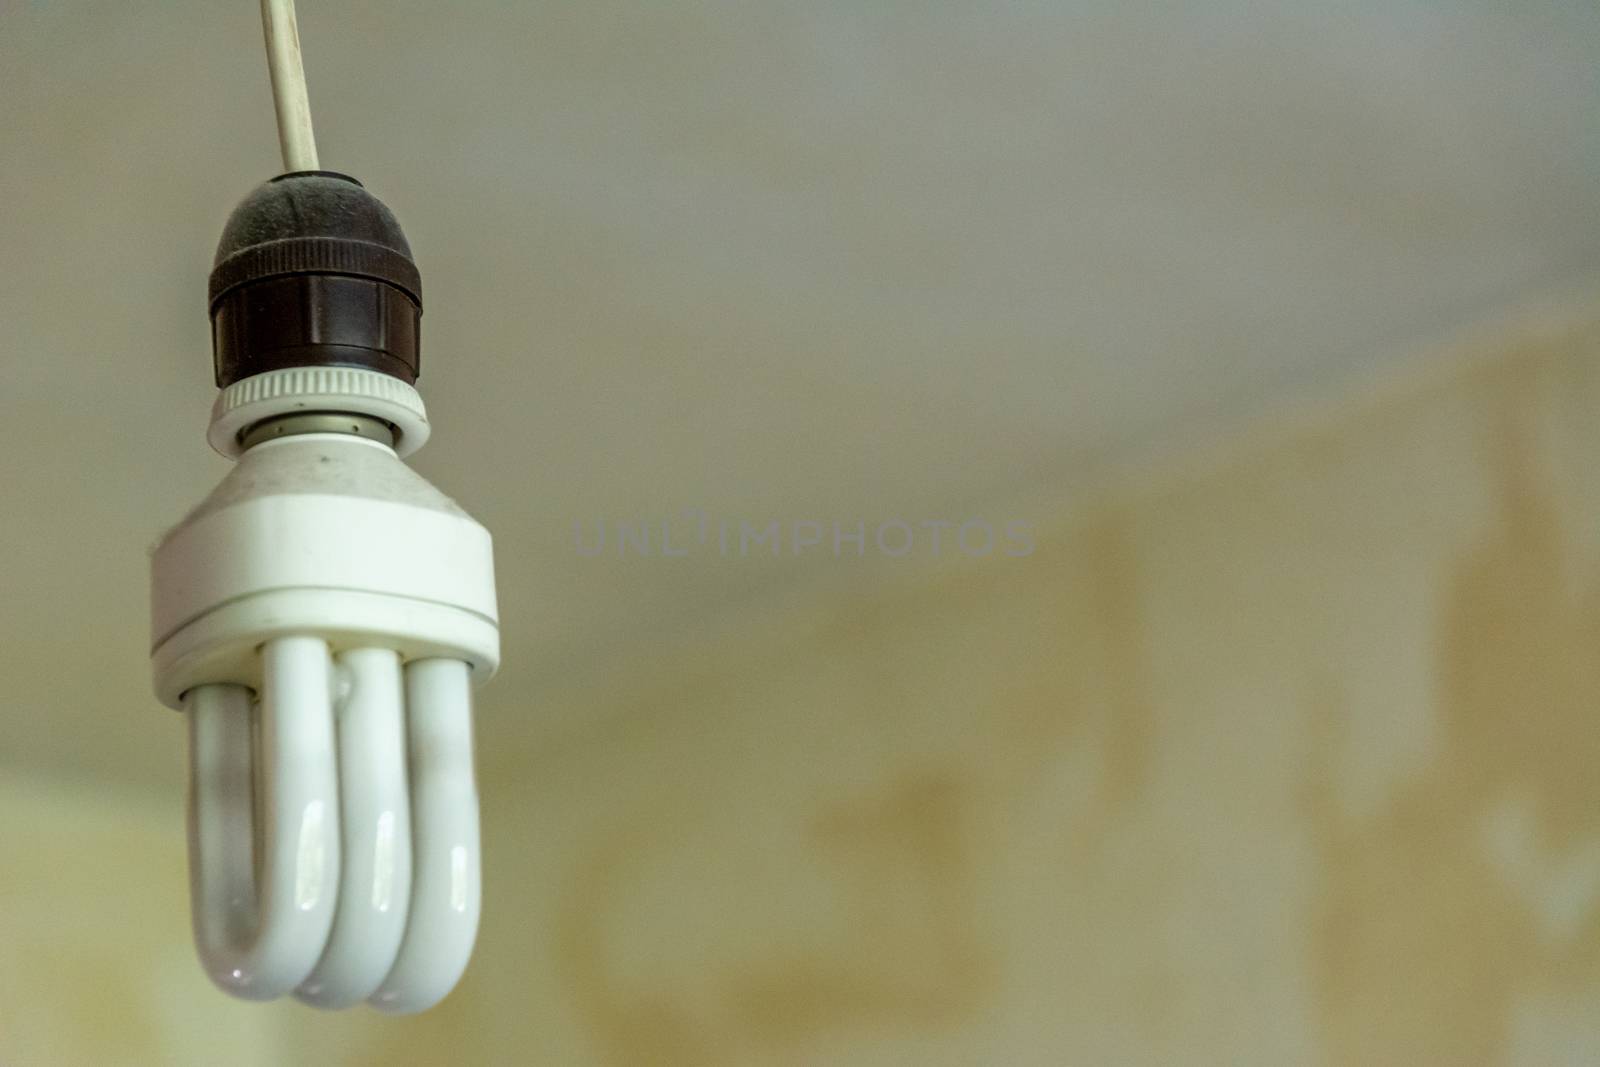 Electrical CFL lamp on barebone socket in old an grunge style room by kb79